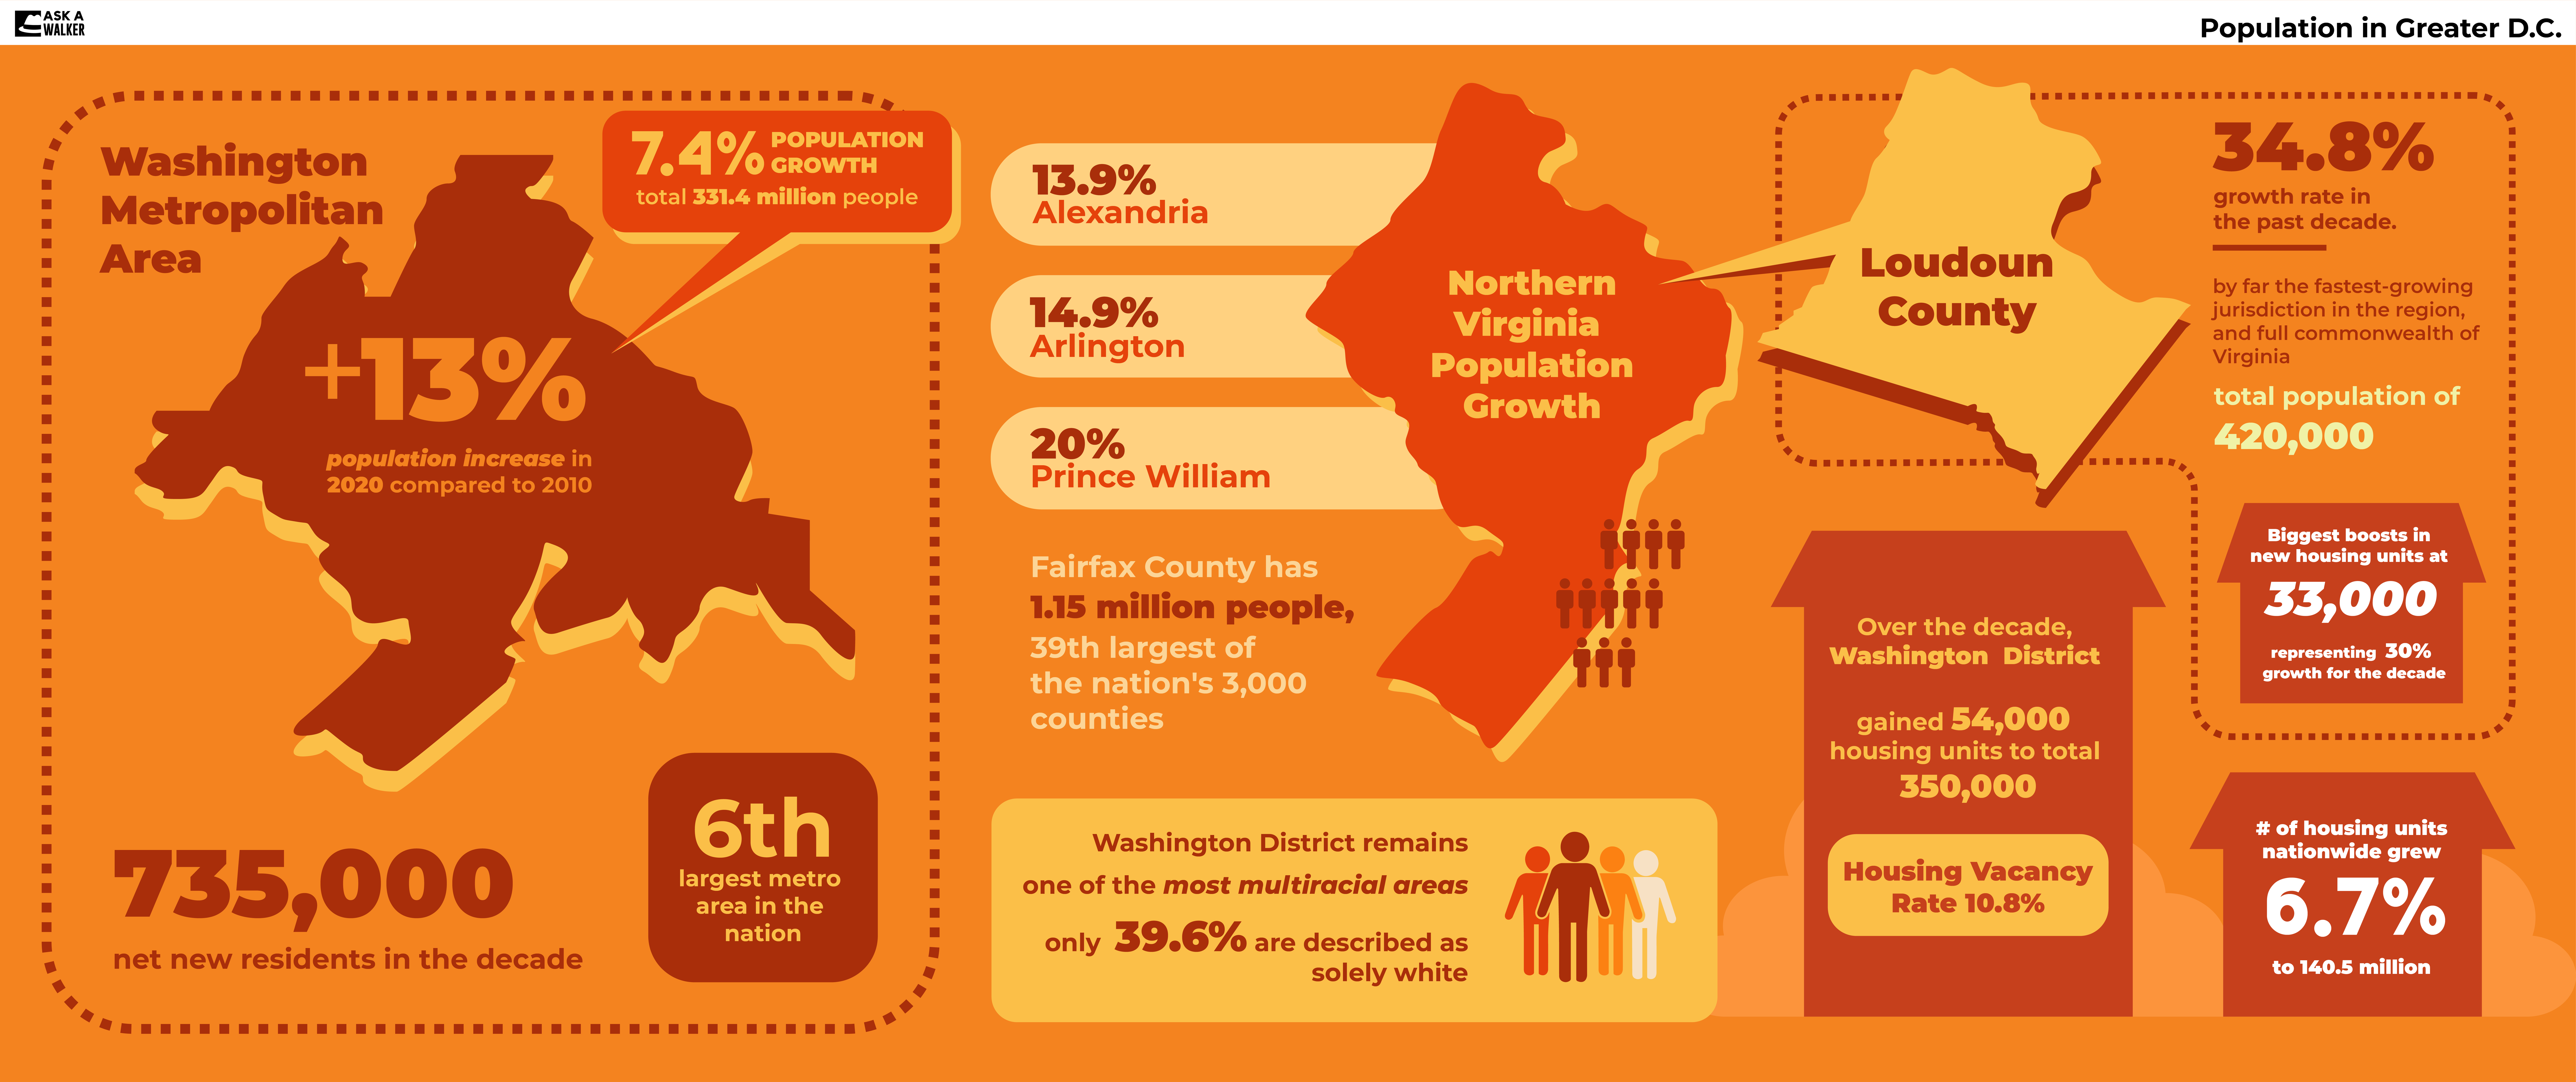 Northern Virginia Population increase infographic.